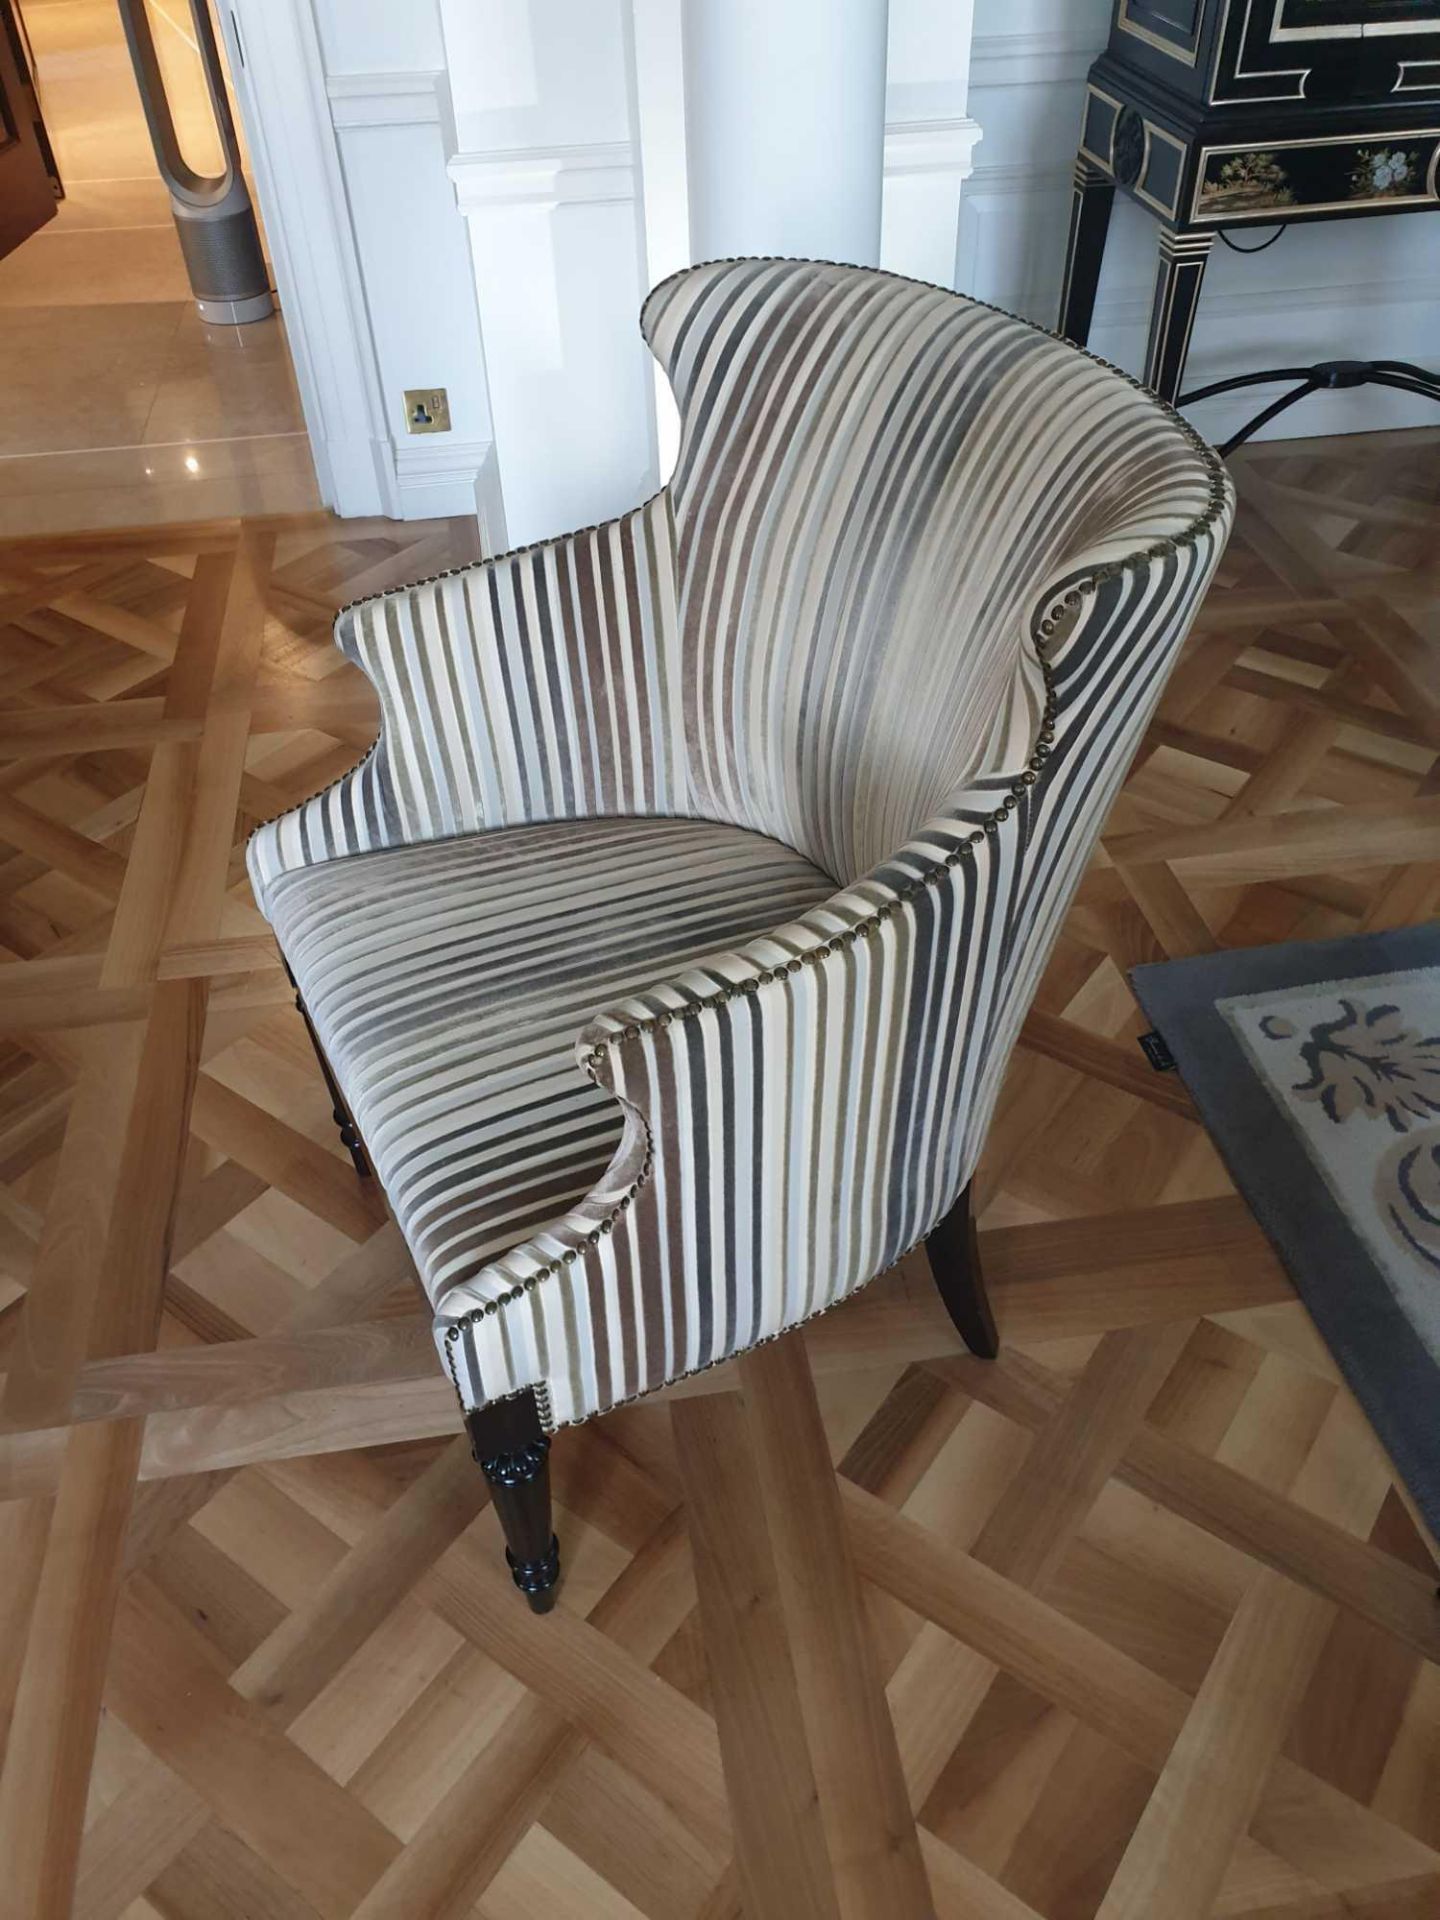 Accent Chair In Upholstered Striped Fabric 65 x 49 x 84cm (Room 702 & 703) - Image 3 of 3